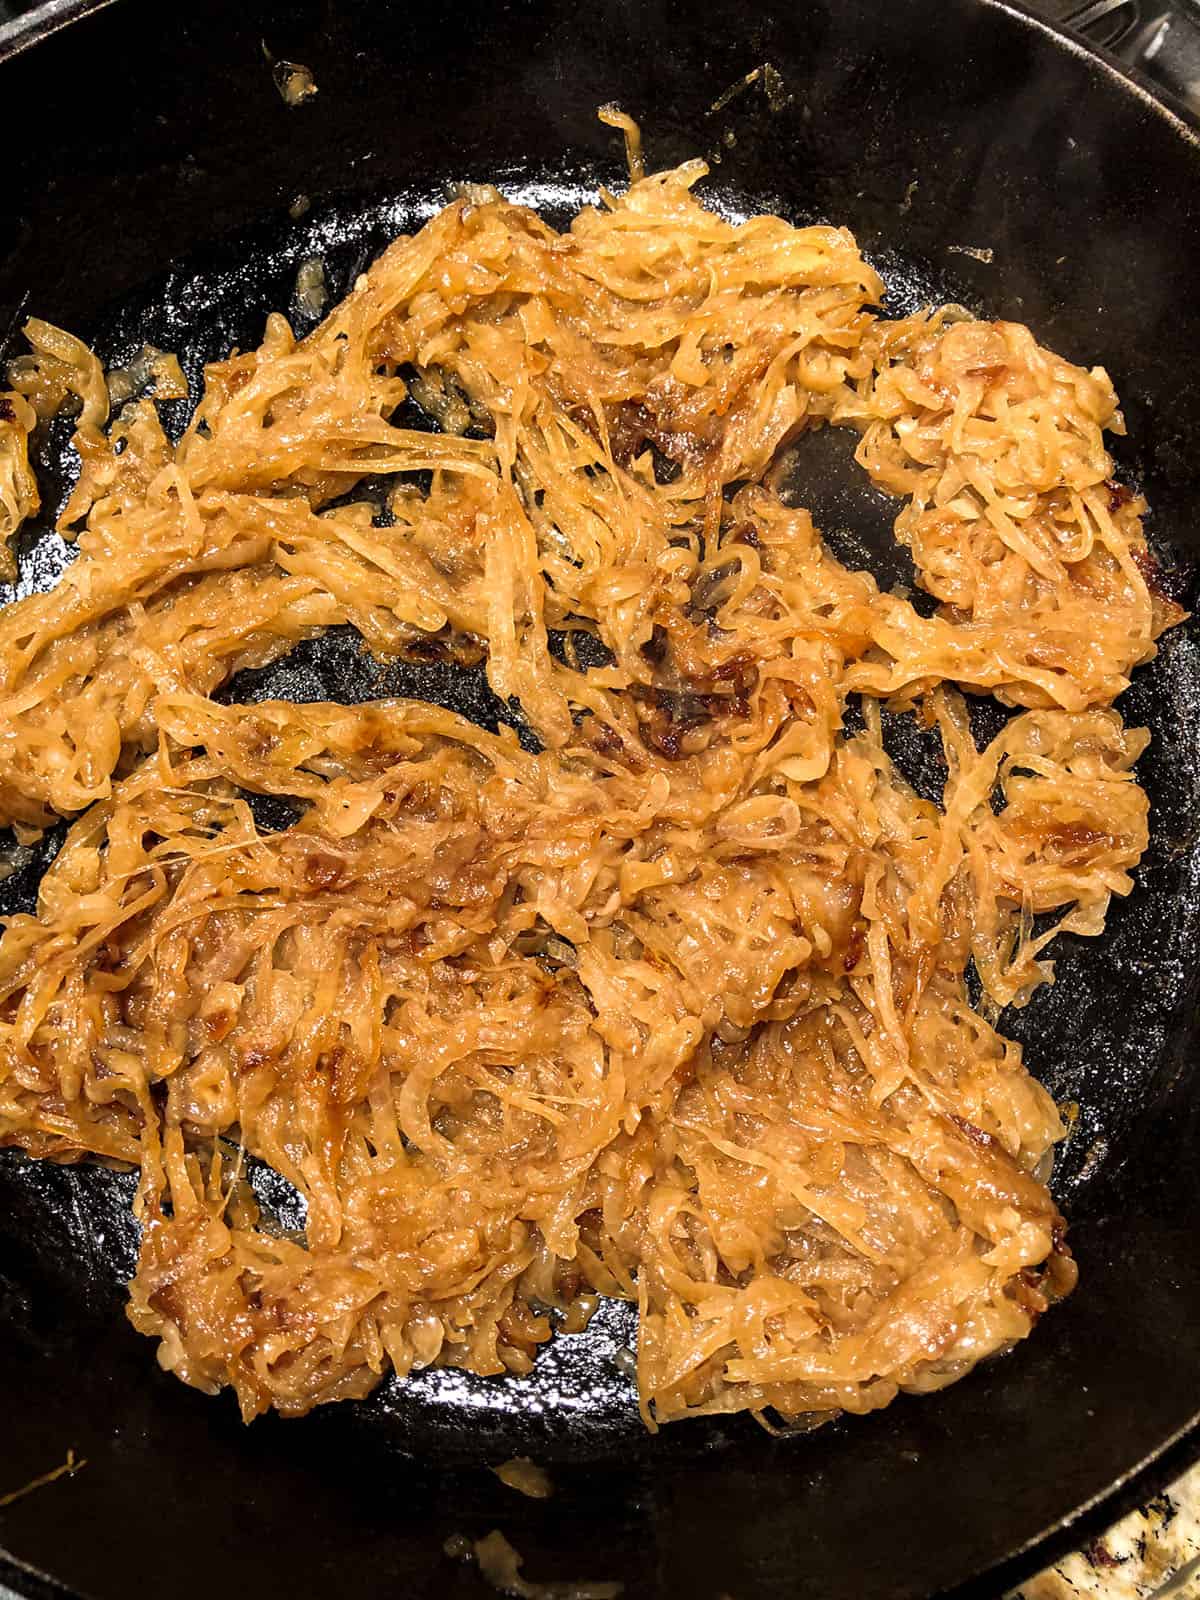 Onions caramelized in cast iron skillet.